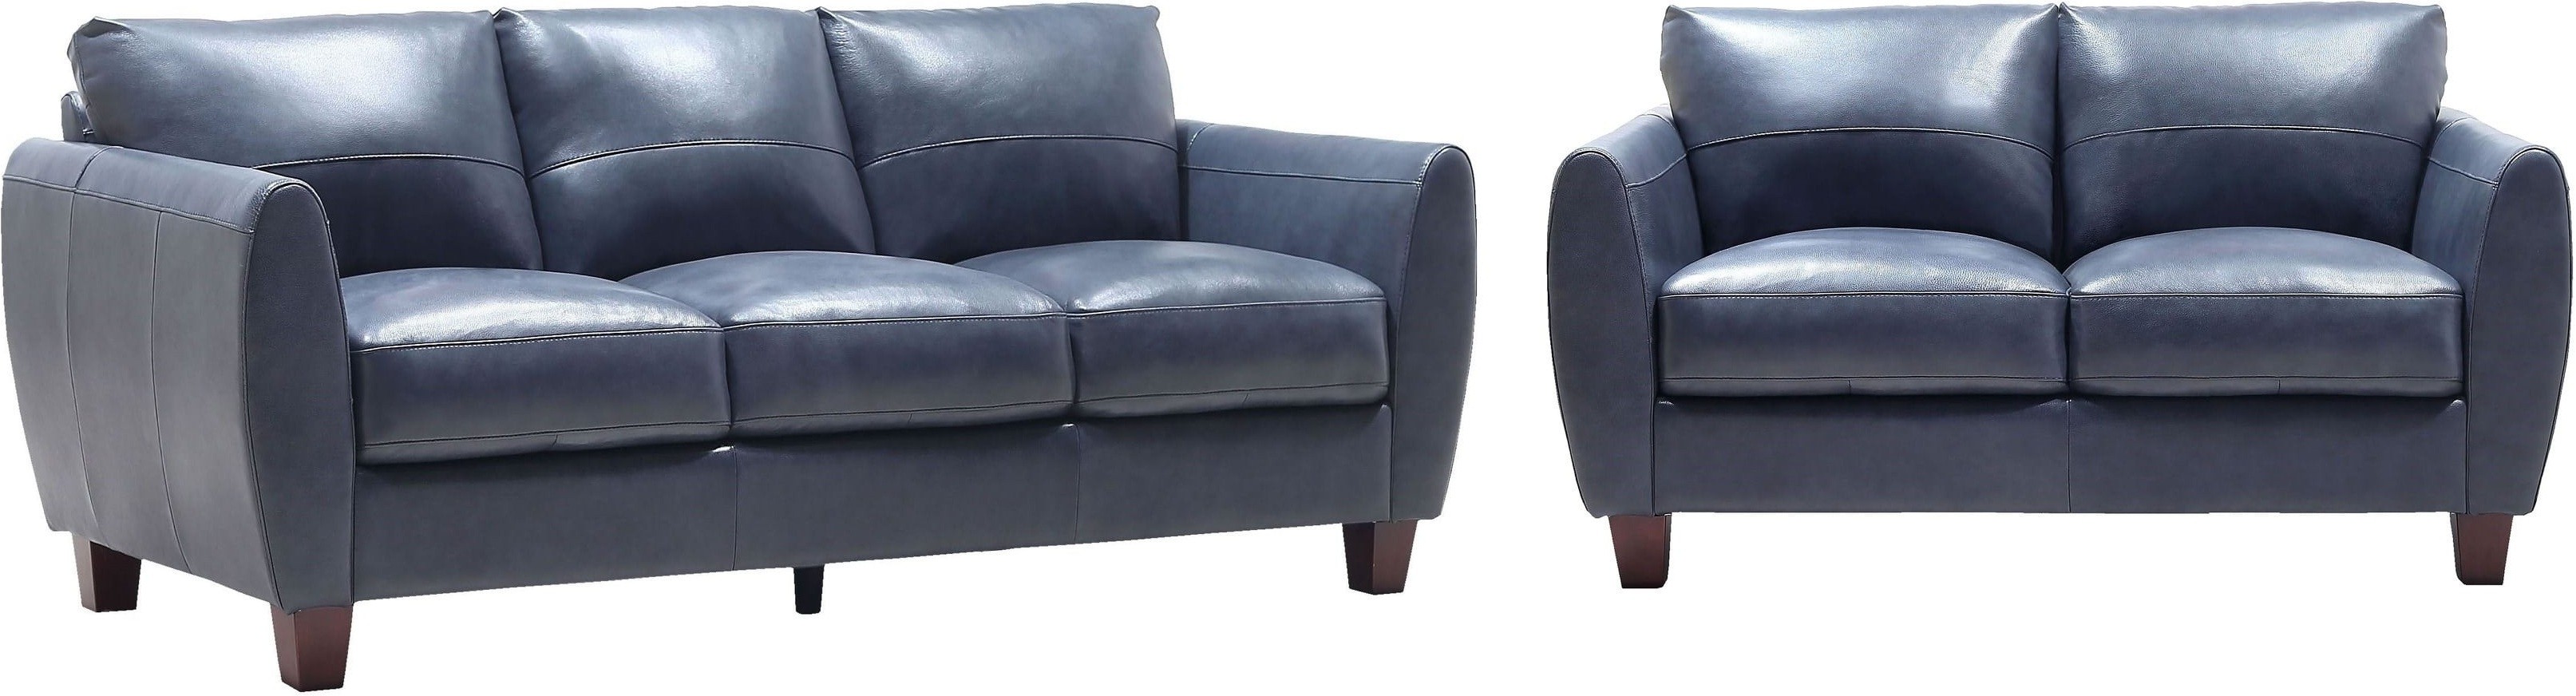 Georgetowne Traverse Blue Leather Sofa, Navy Leather Couch